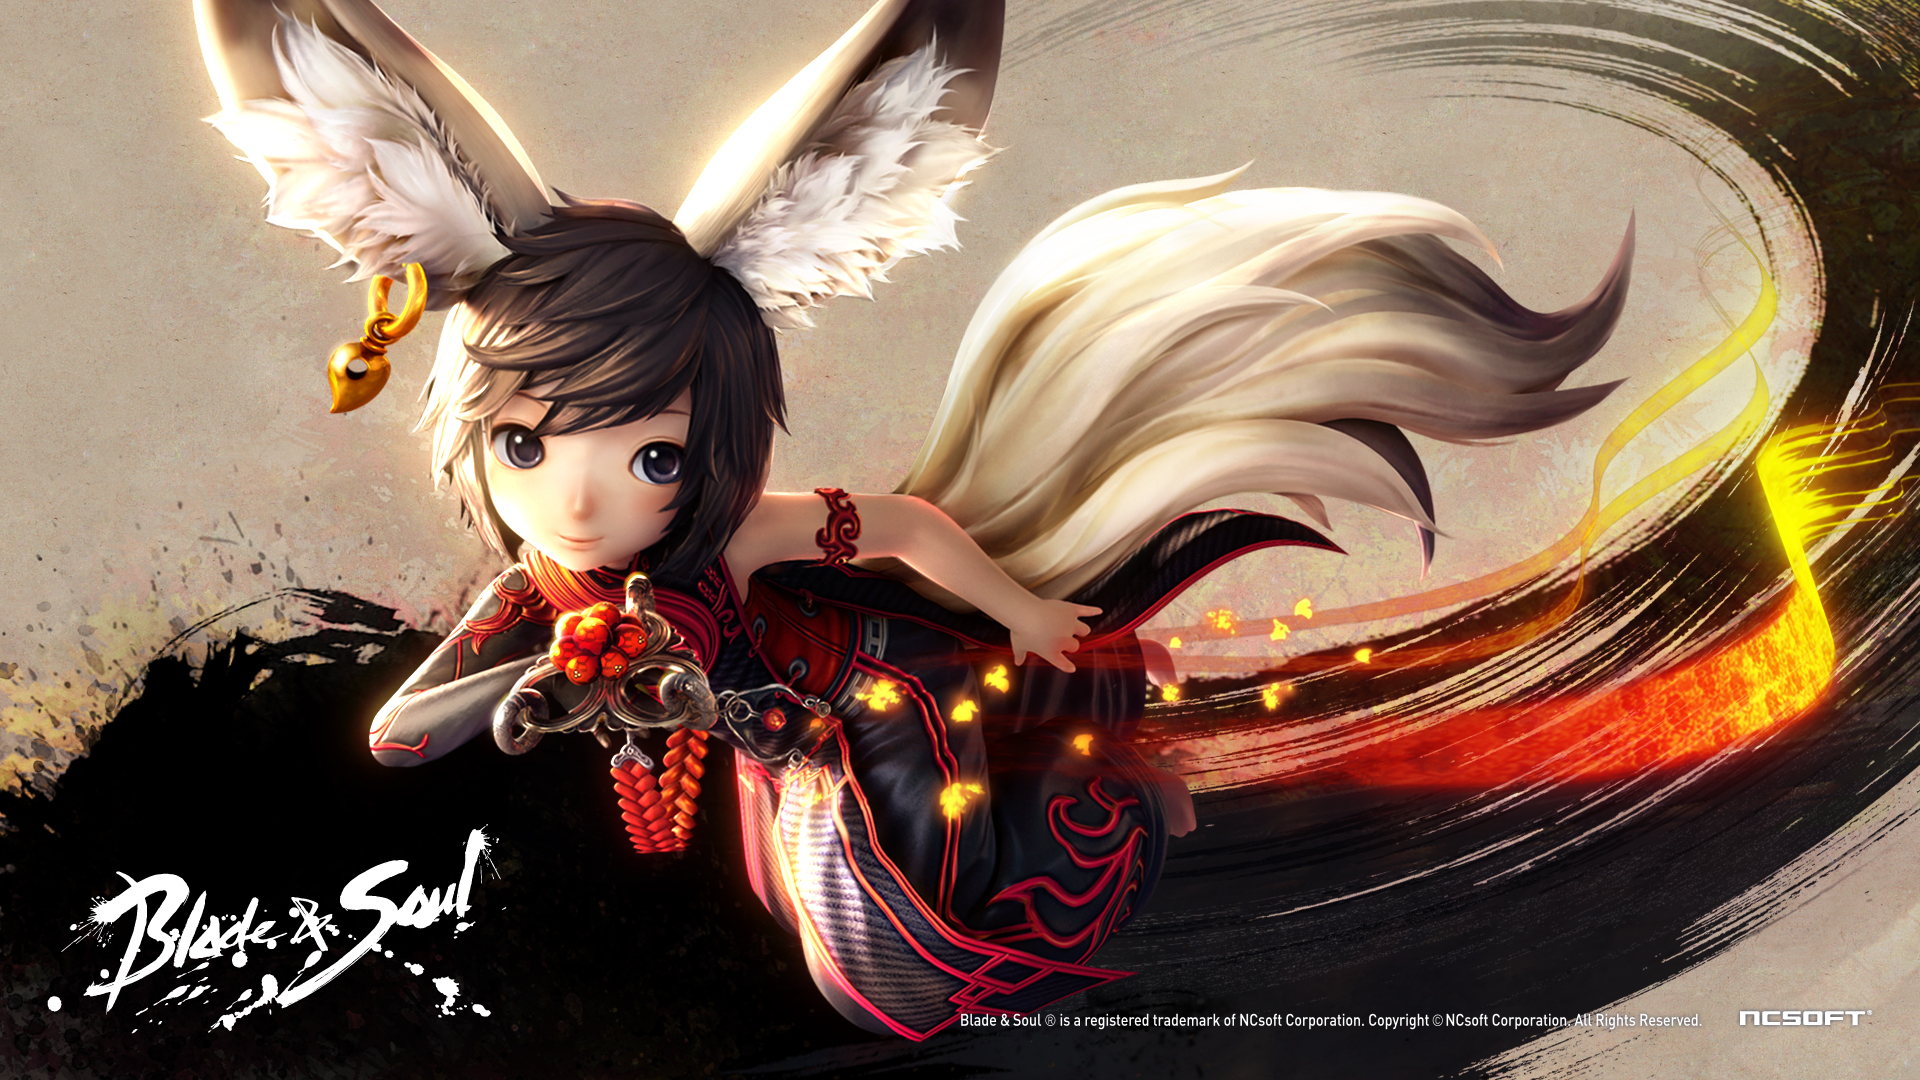 40+ Blade & Soul HD Wallpapers and Backgrounds